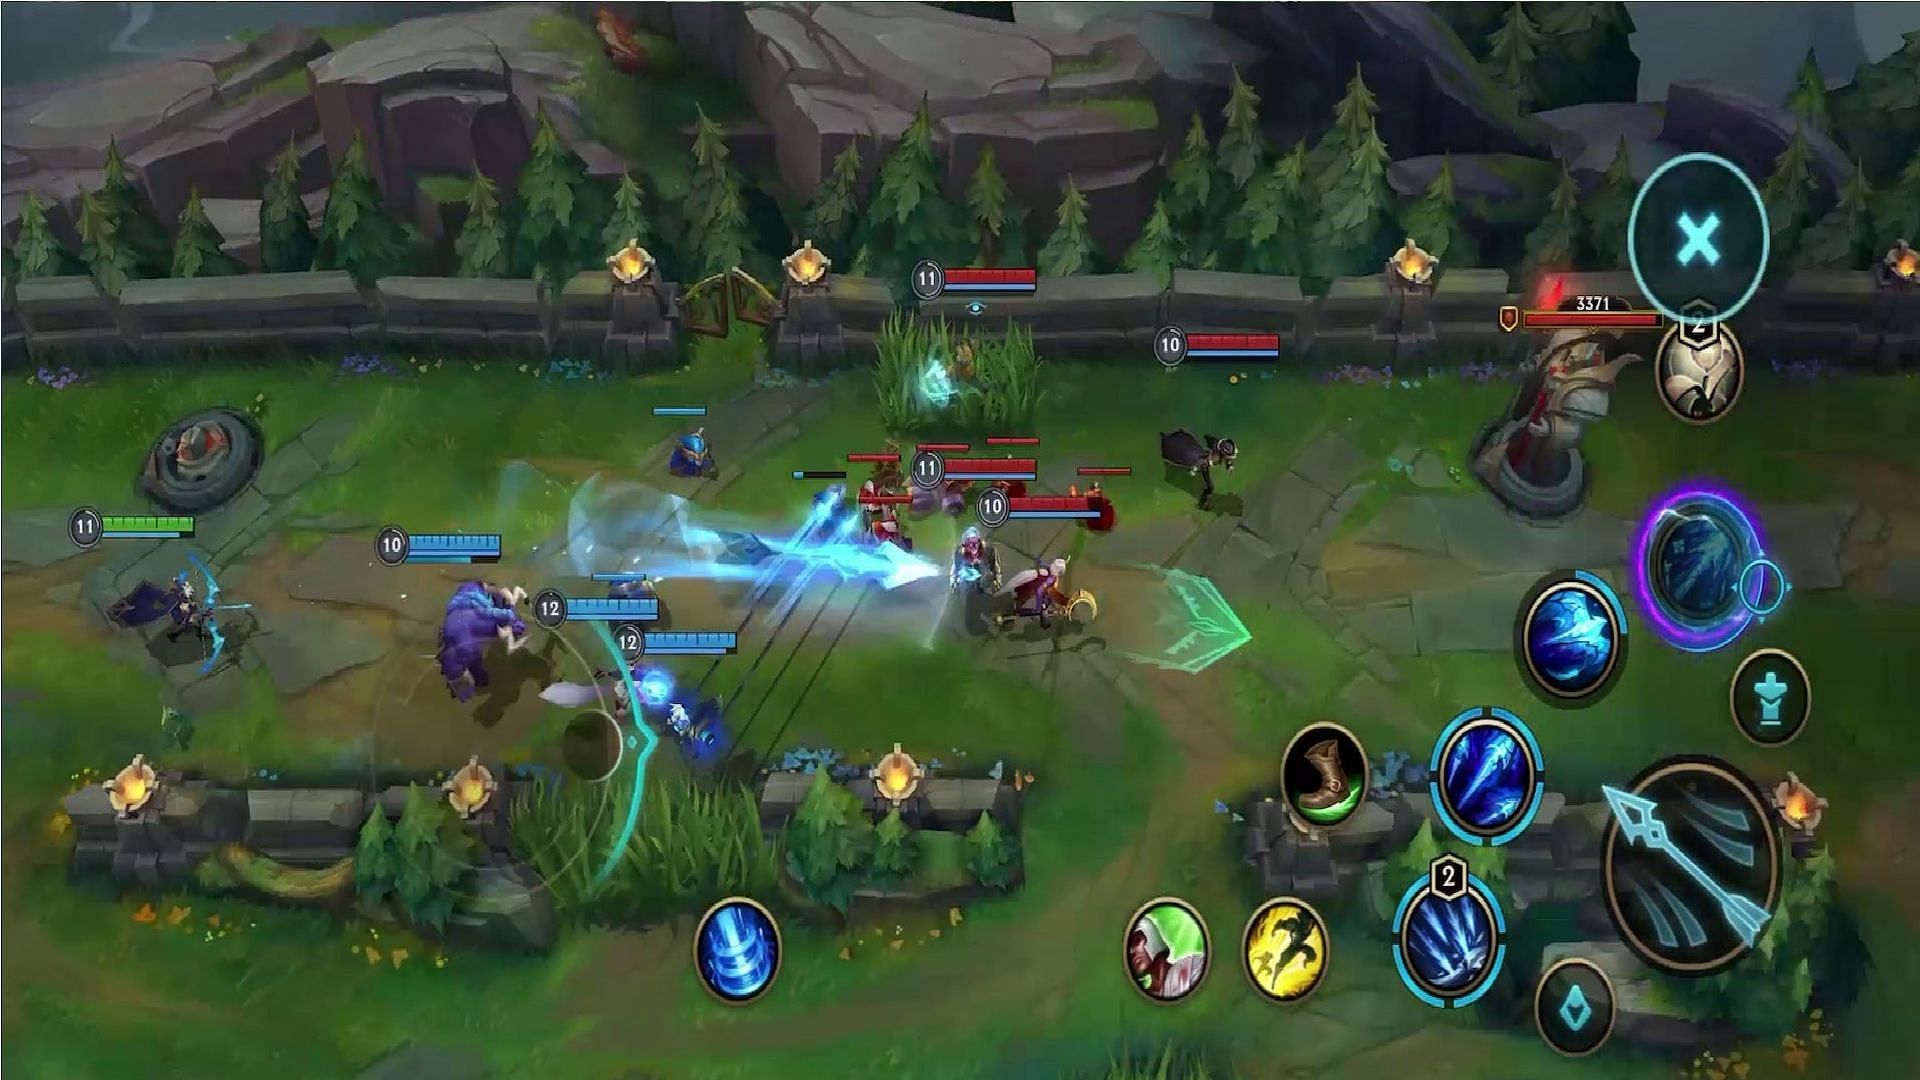 tips to win matches in lol wild rift: 5 best tips to win more